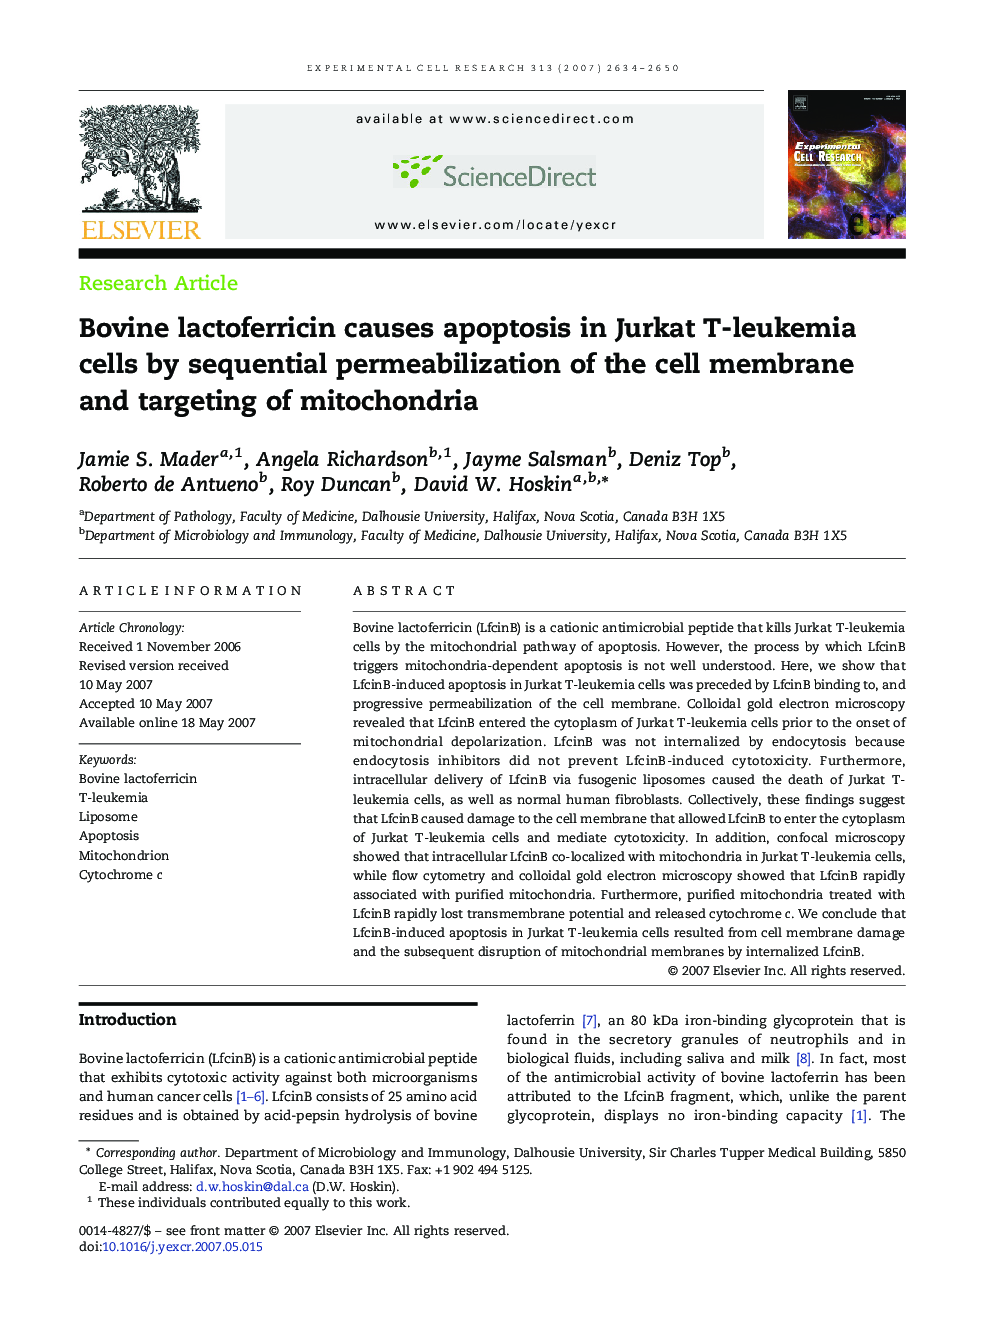 Bovine lactoferricin causes apoptosis in Jurkat T-leukemia cells by sequential permeabilization of the cell membrane and targeting of mitochondria